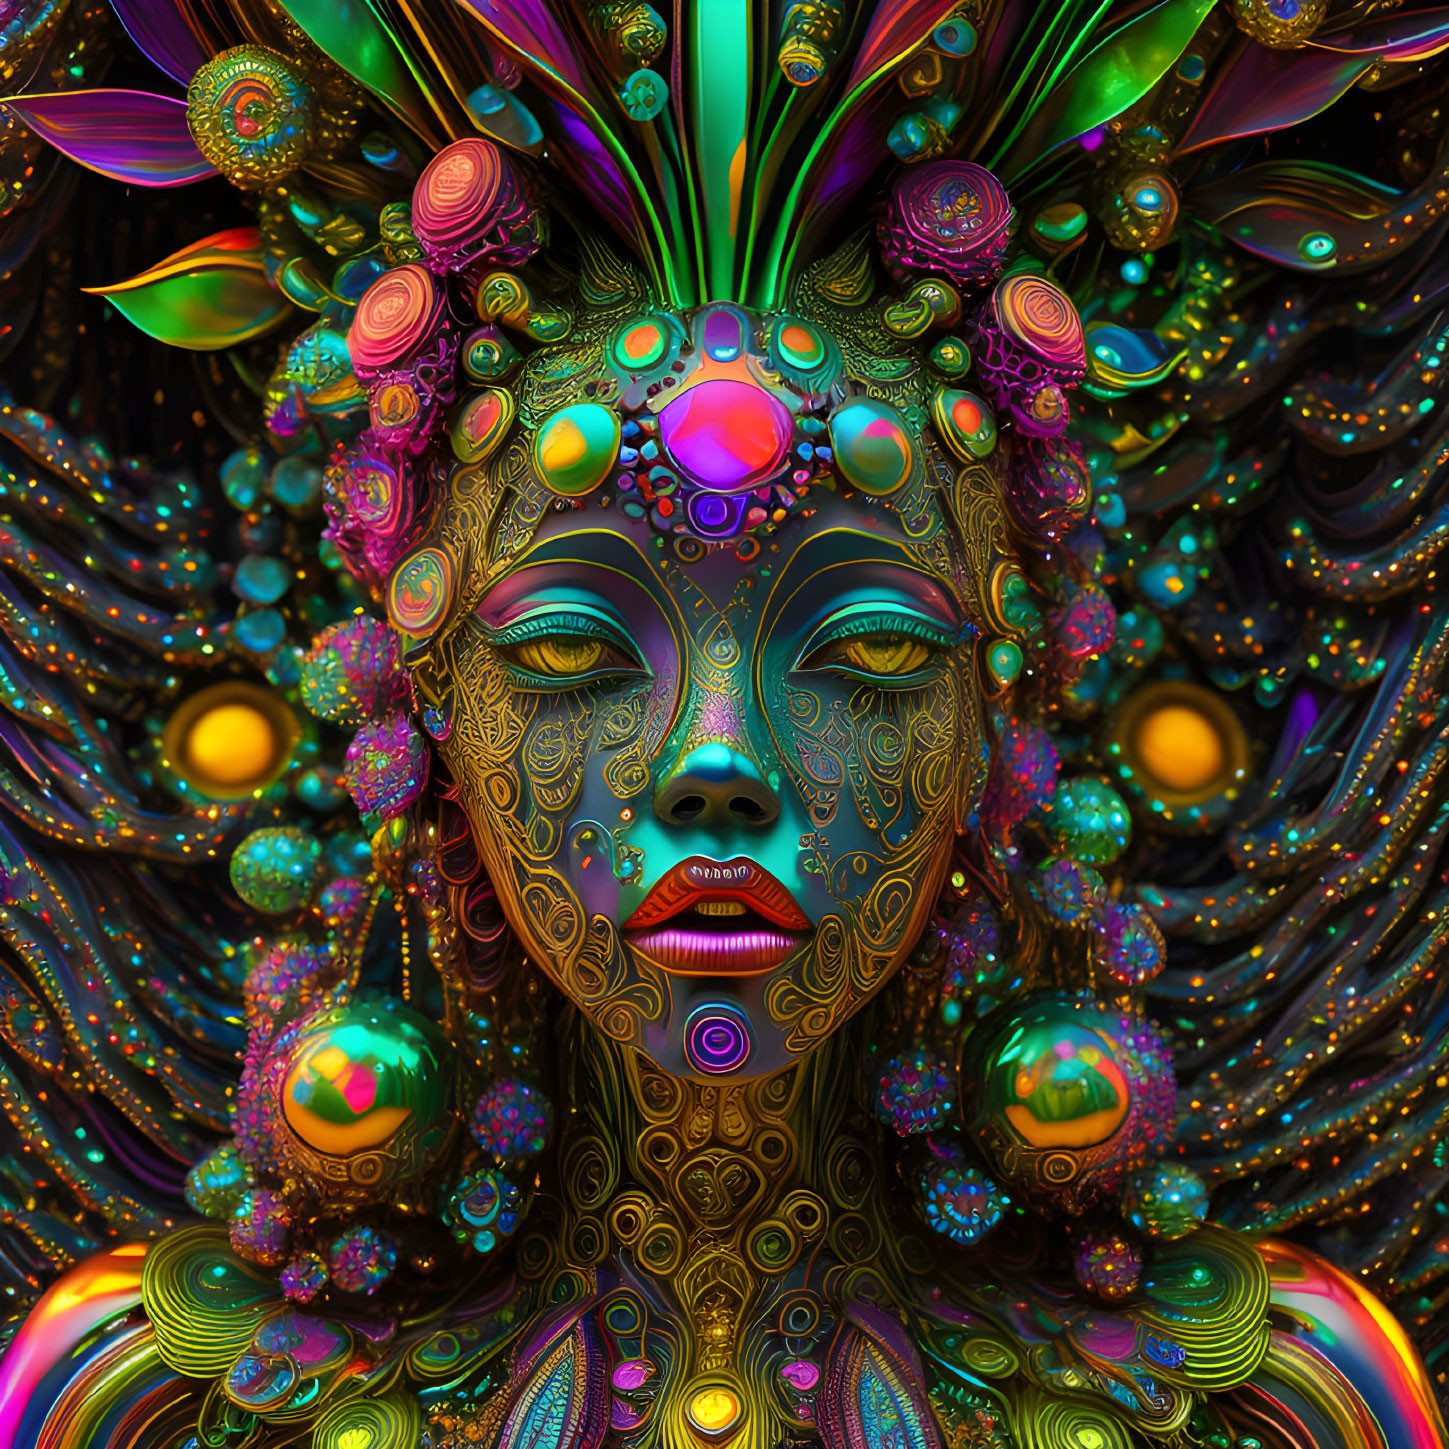 Colorful digital portrait of female figure with jewels, feathers, and intricate patterns